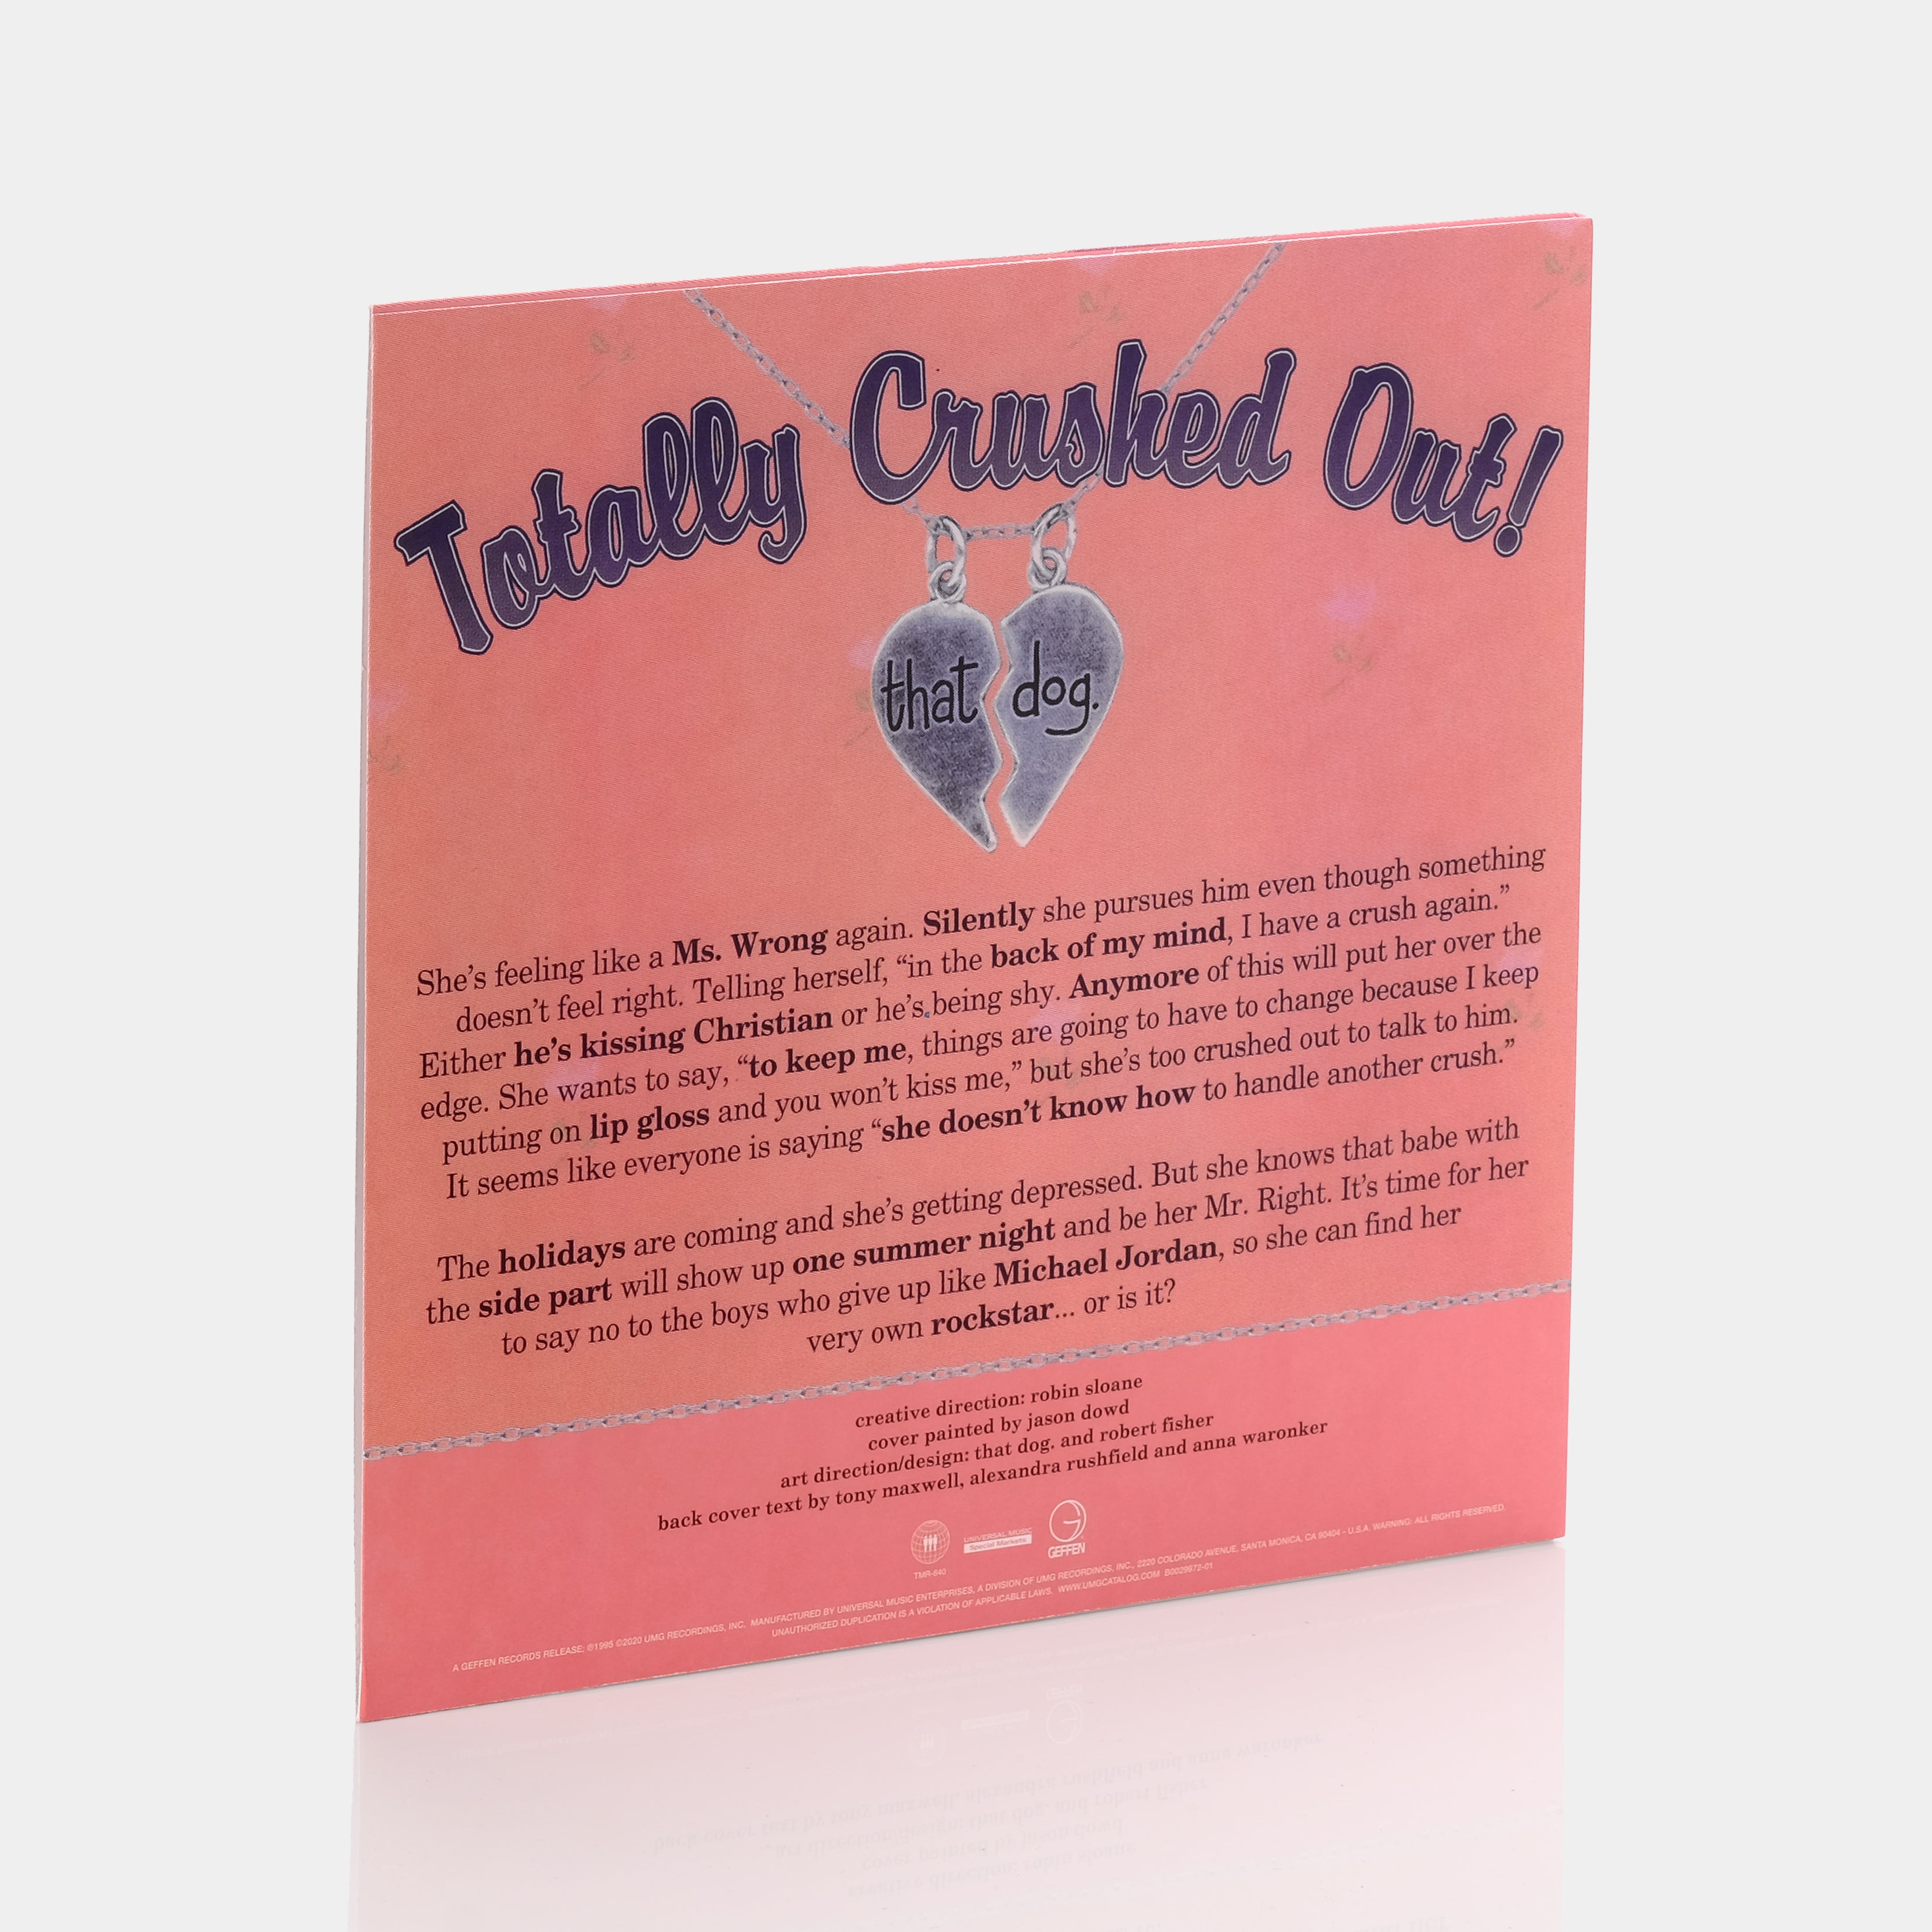 that dog. - Totally Crushed Out LP Vinyl Record